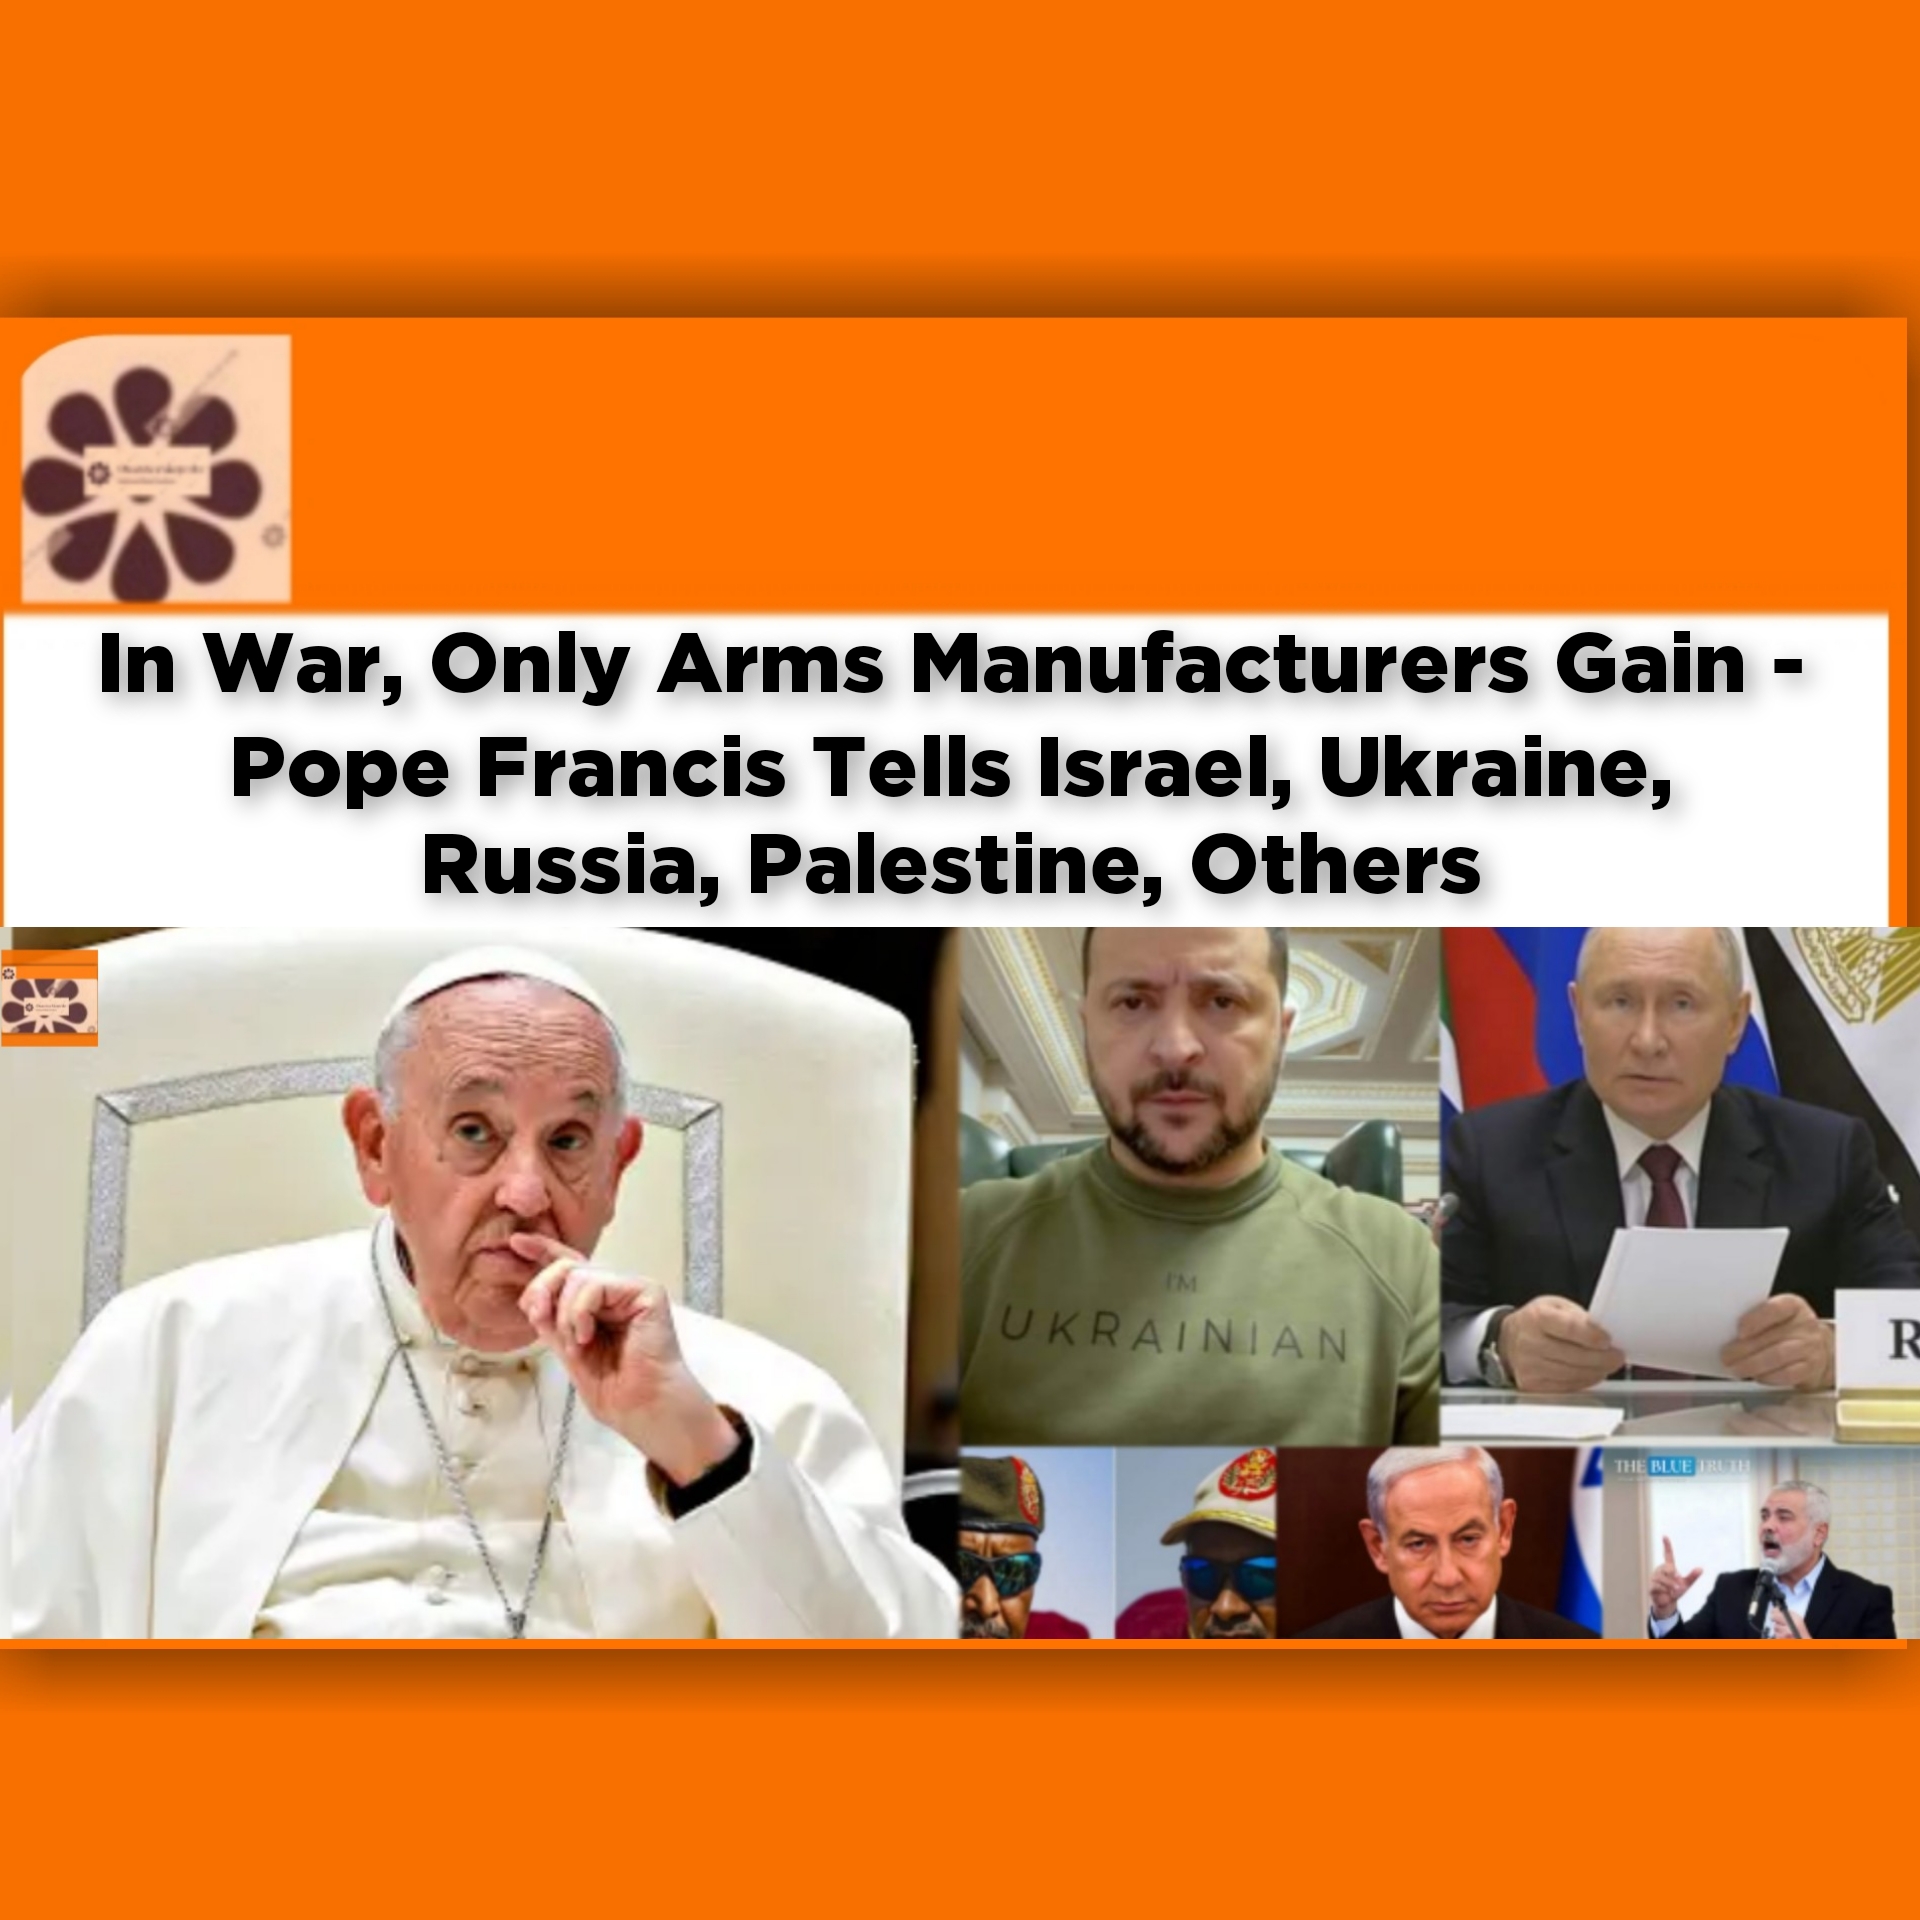 In War, Only Arms Manufacturers Gain - Pope Francis Tells Israel, Ukraine, Russia, Palestine, Others ~ OsazuwaAkonedo #NNPP